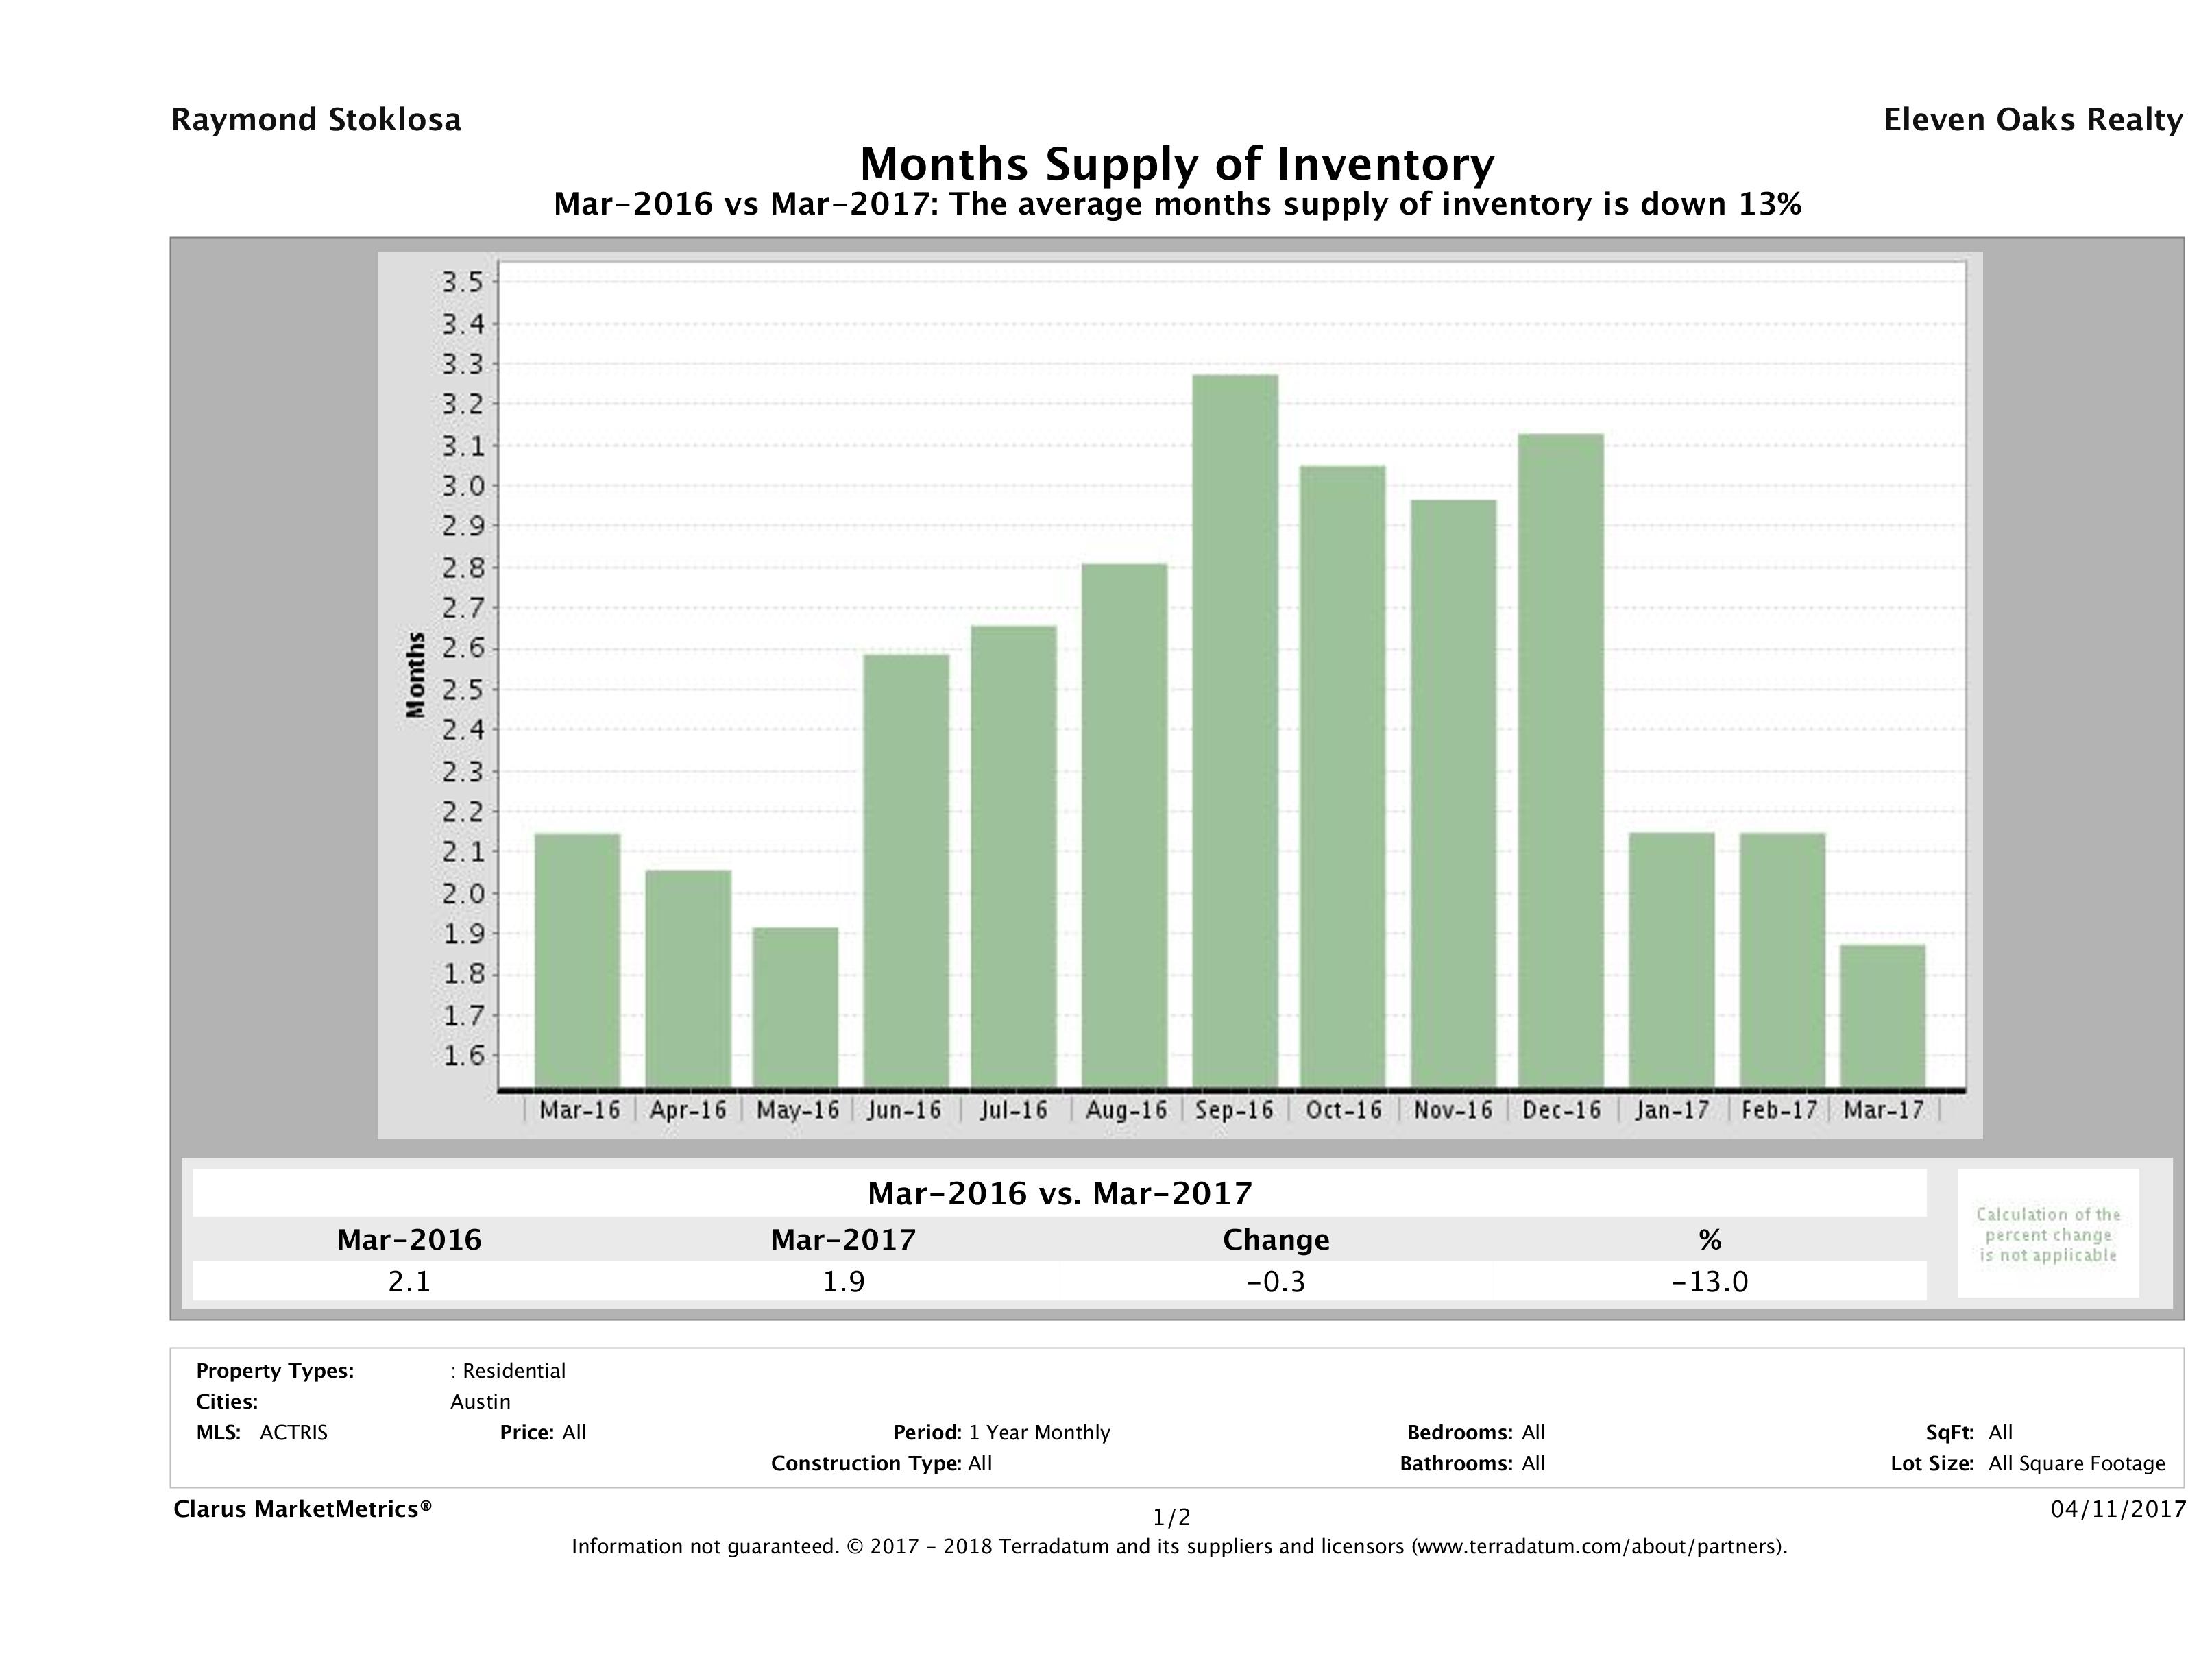 Austin single family home months inventory March 2017